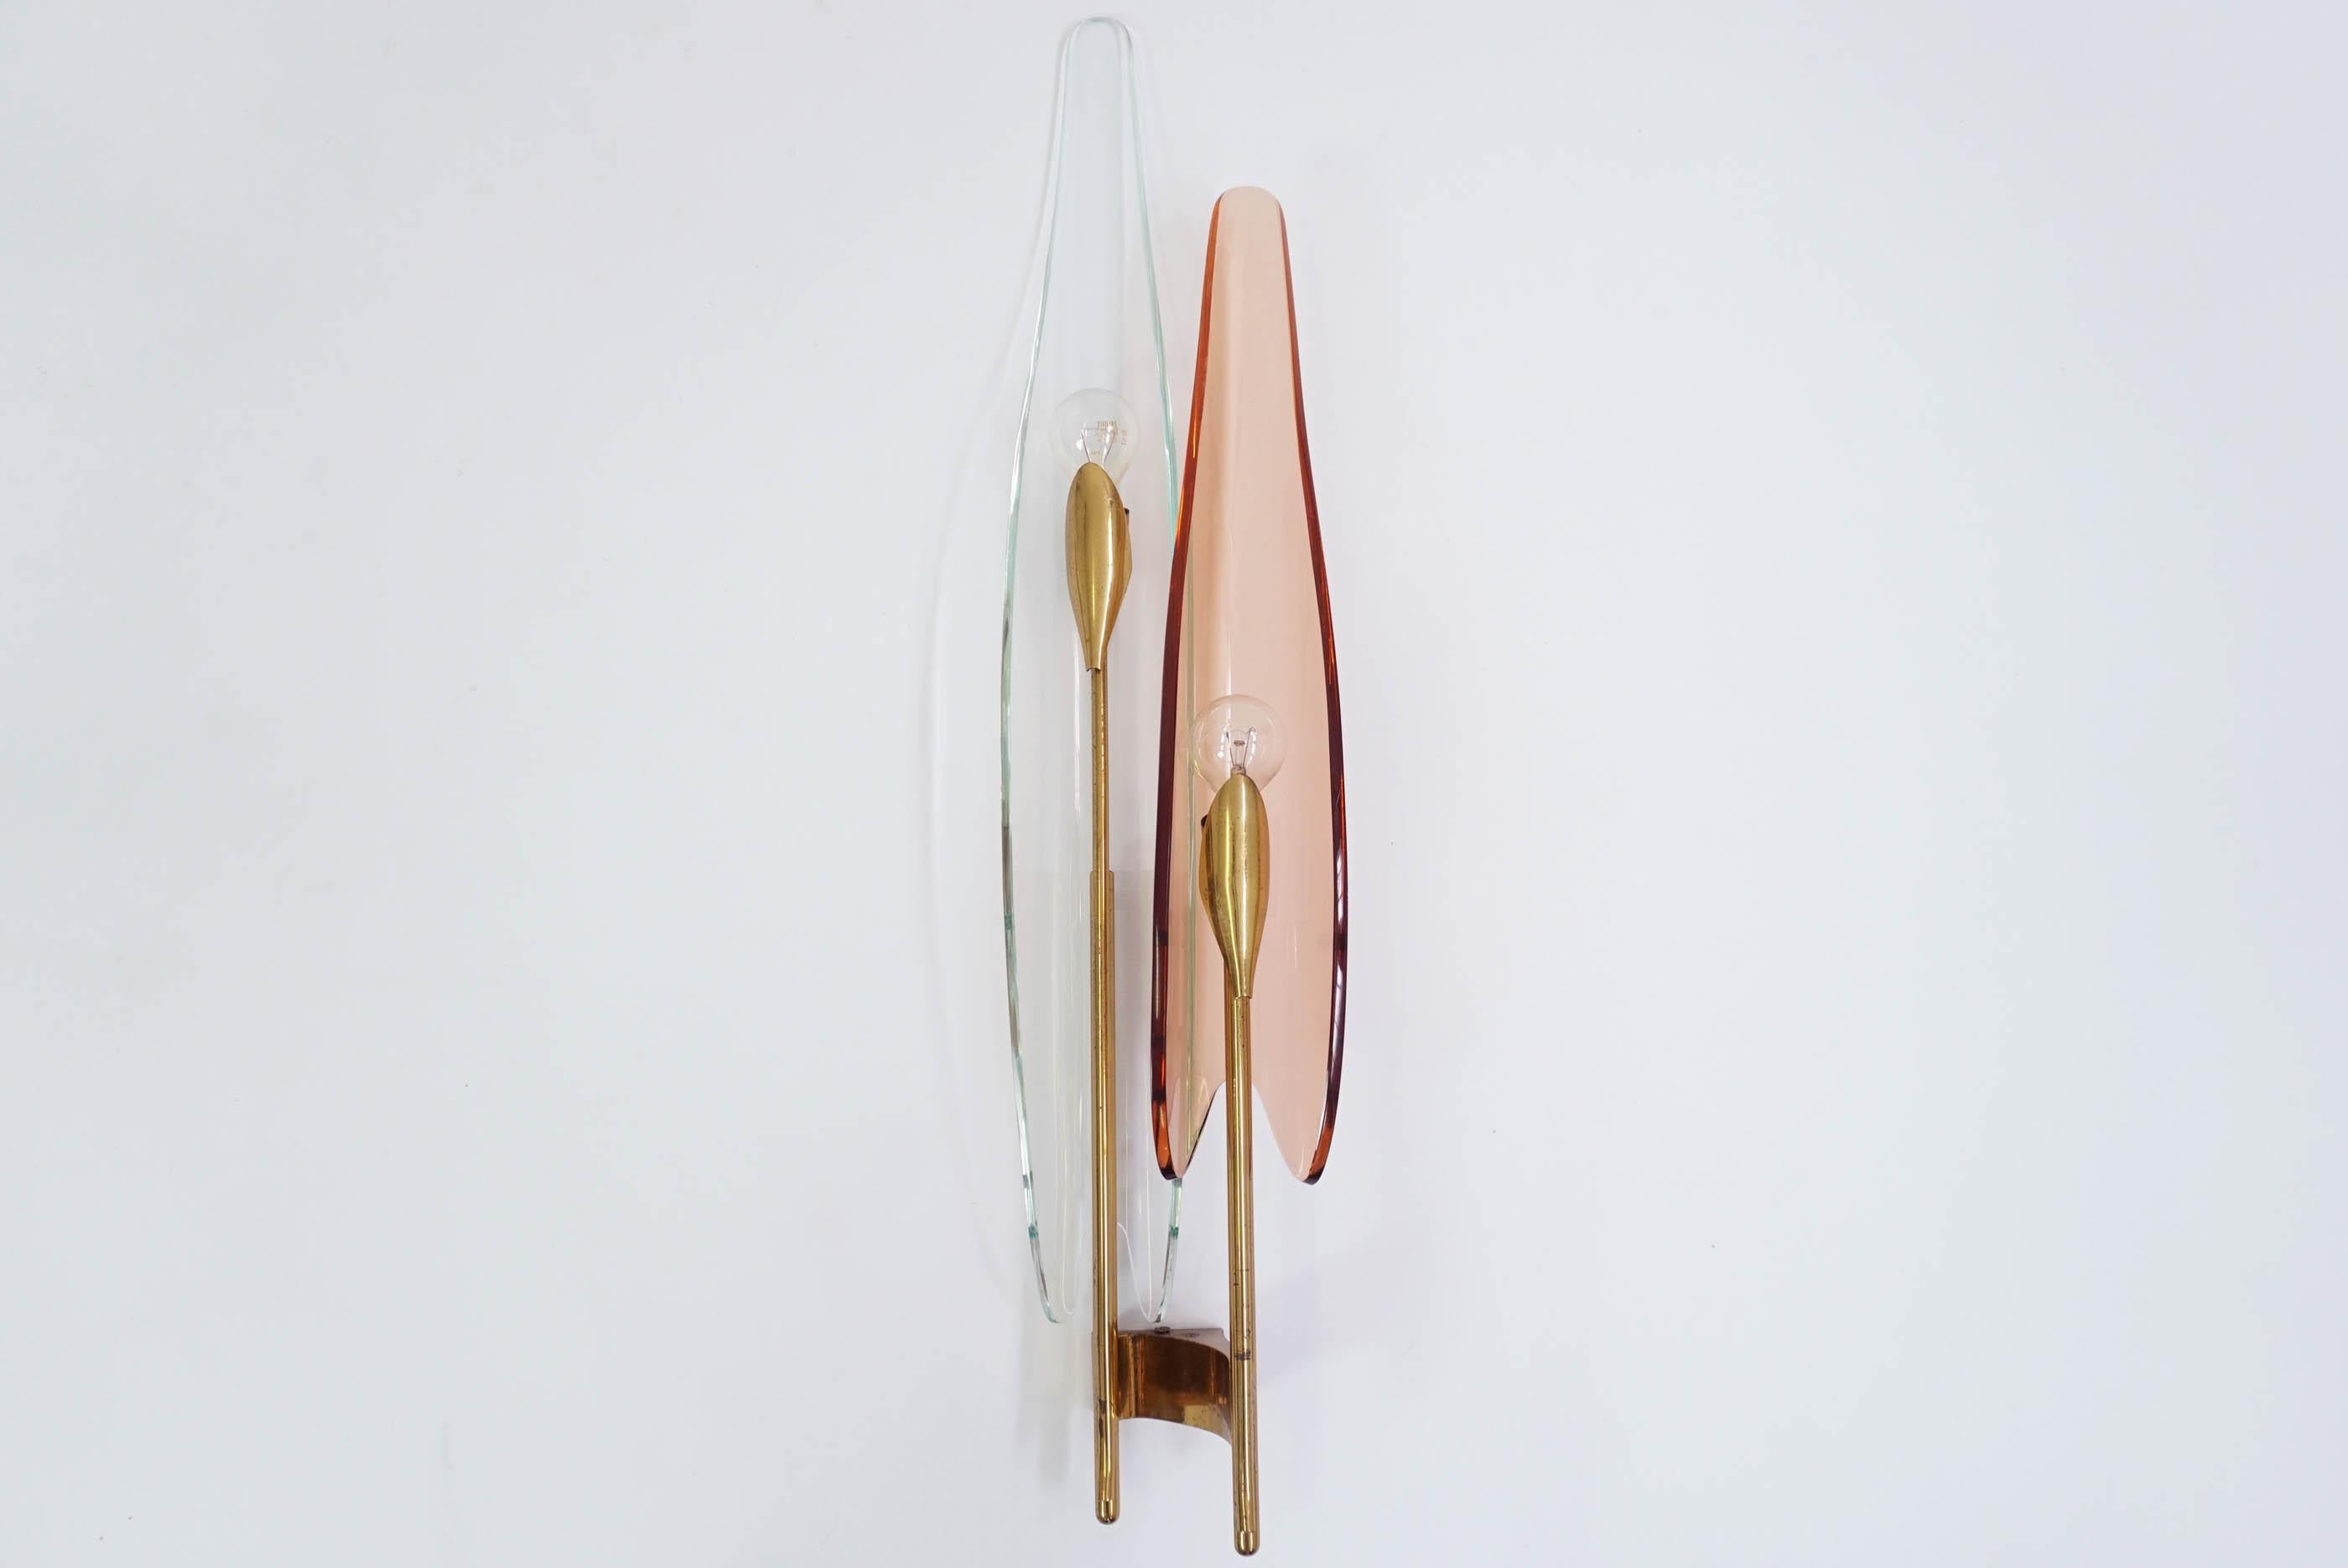 Big sexy and elegant sconce by Max Ingrand for Fontana Arte
Curved glass in pale rose and transparent green
1950, Italy.